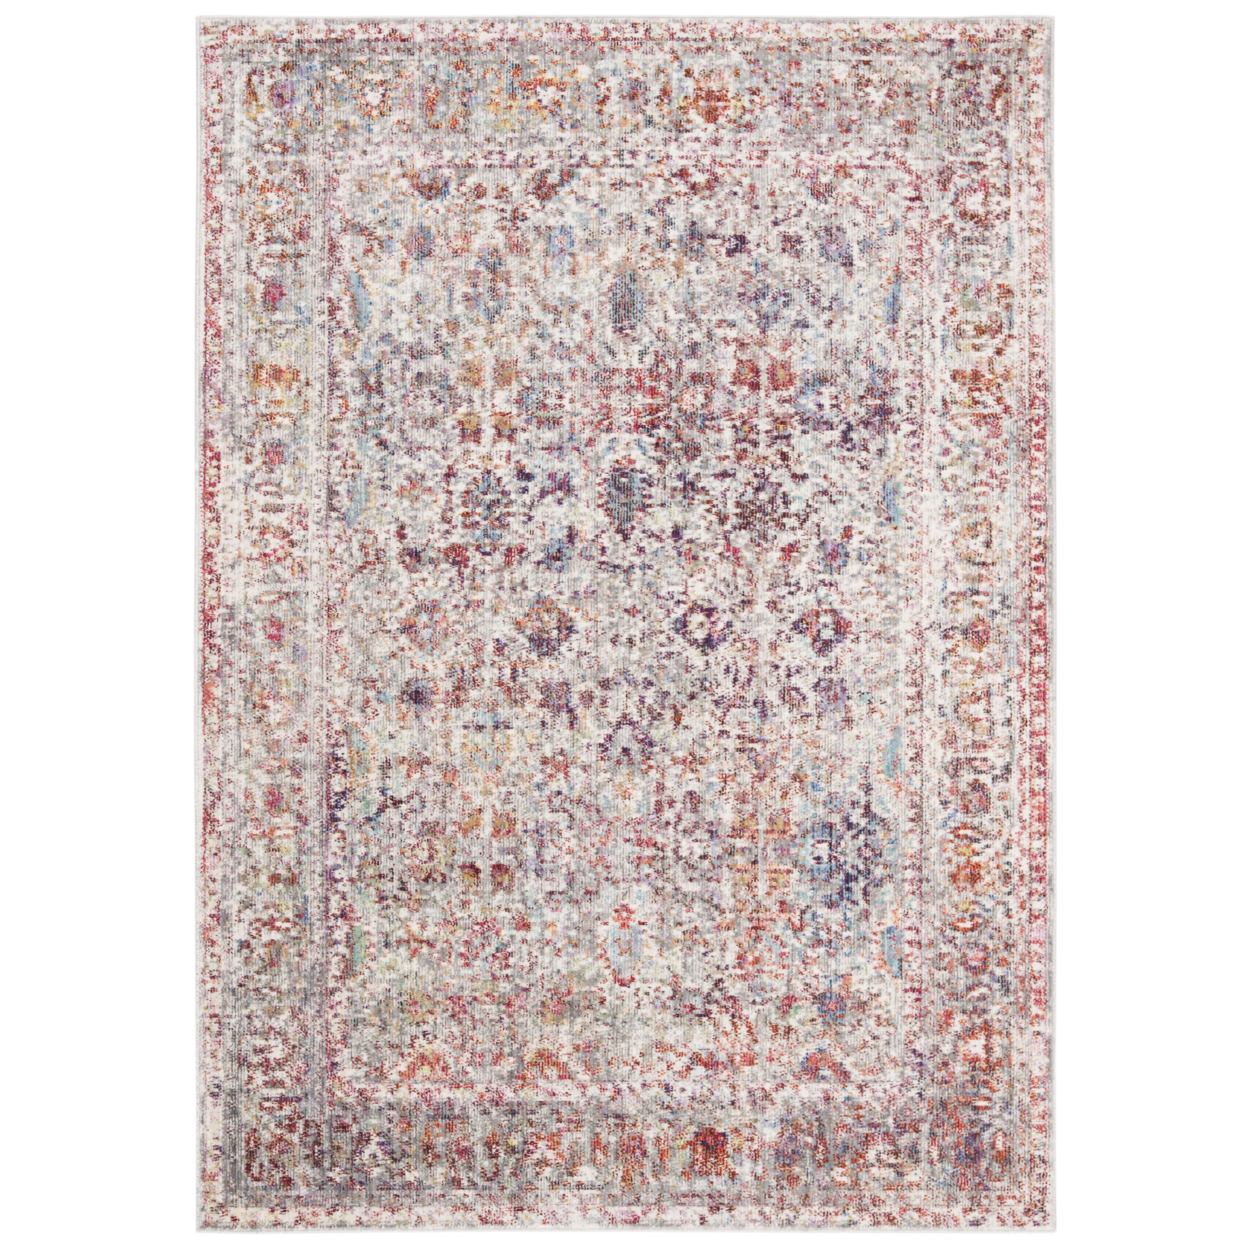 SAFAVIEH Valencia Collection VAL168Q Grey / Red Rug - 4' X 5' 7